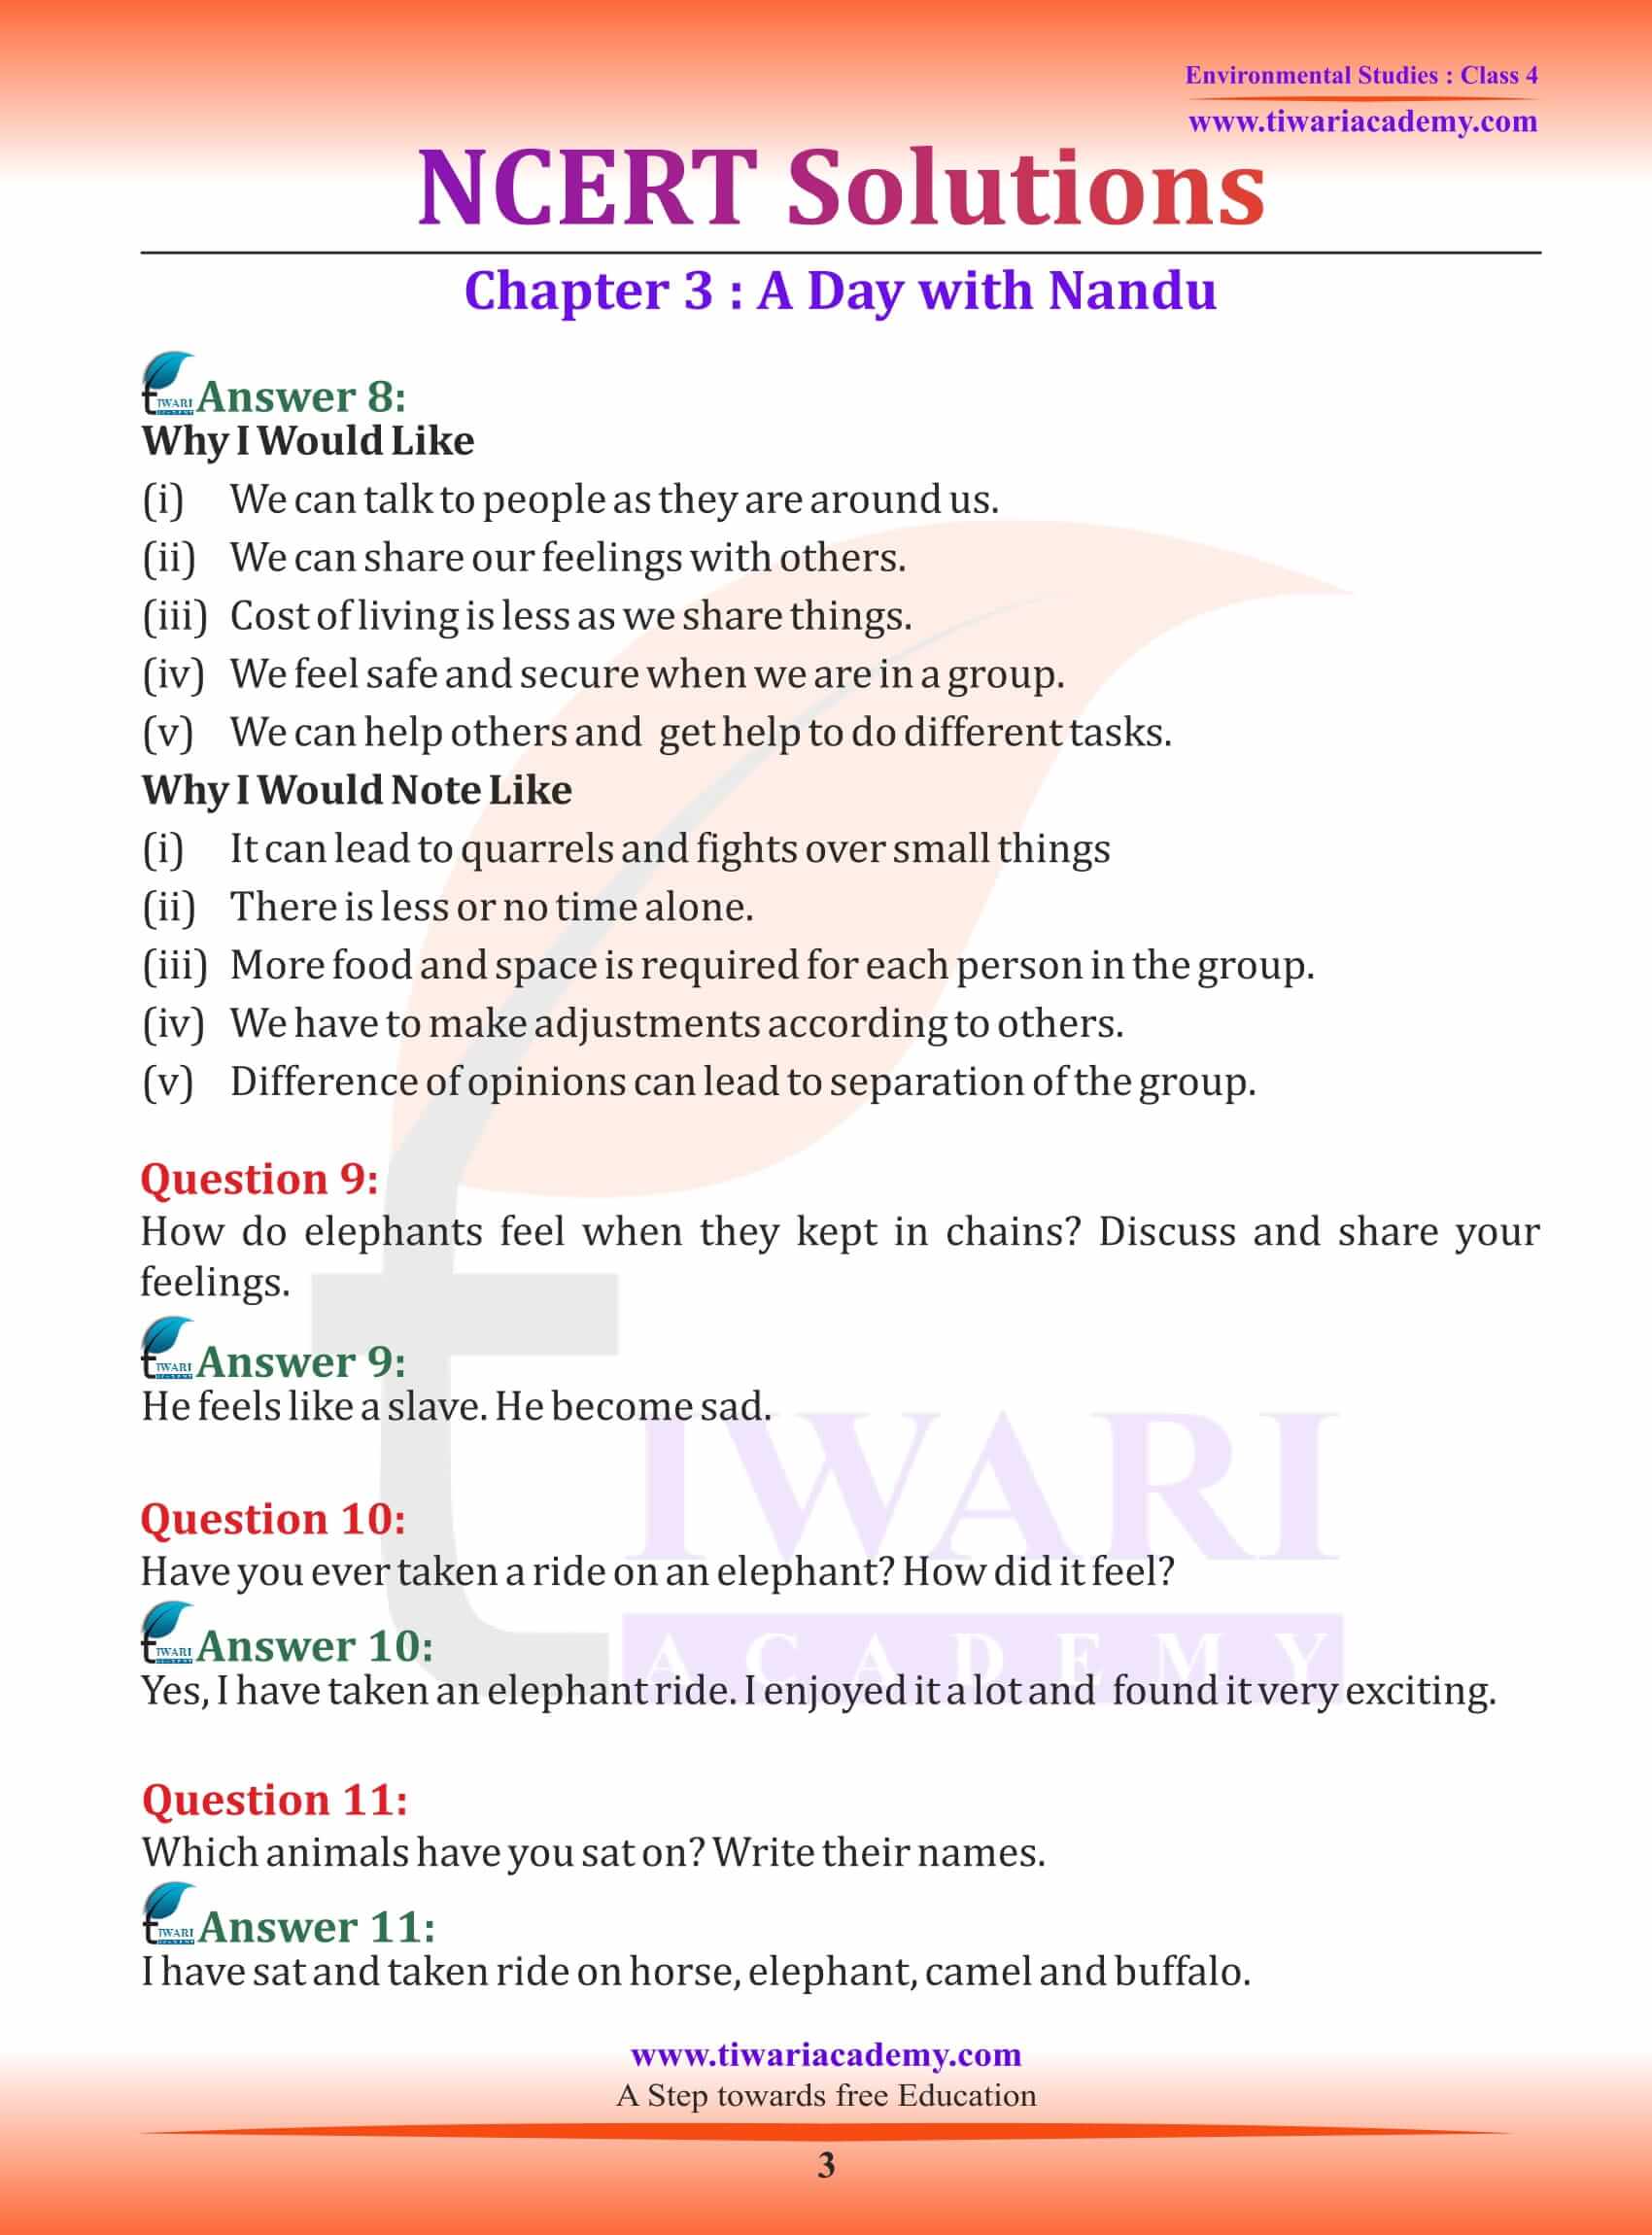 NCERT Solutions for Class 4 EVS Chapter 3 in English Medium